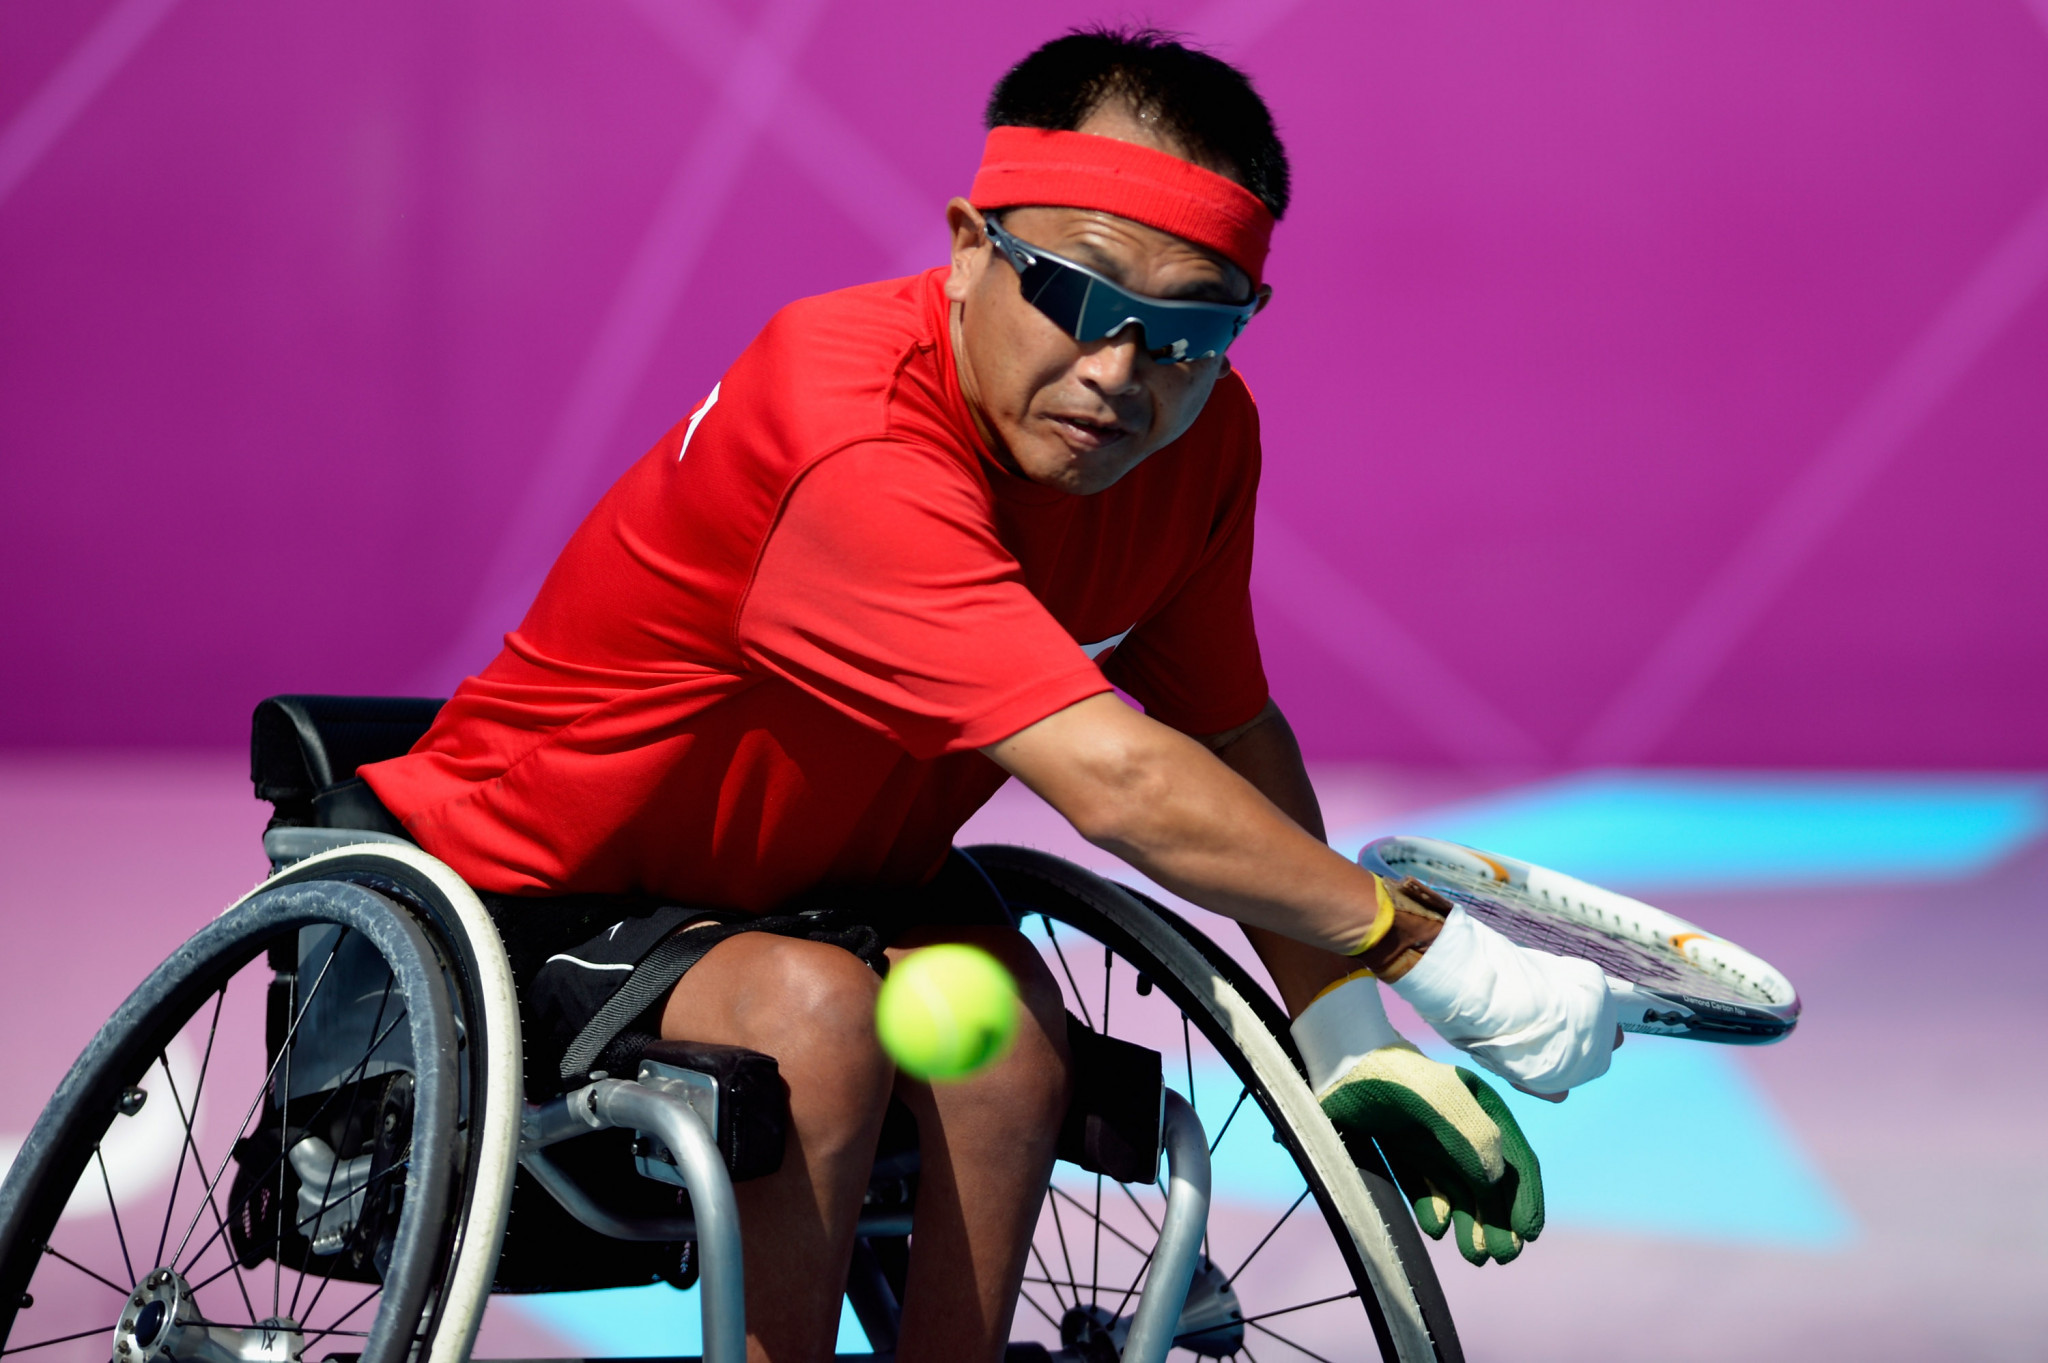 Japan’s Mitsuteru Moroishi is through to the second round of the quad singles event at the British Open Wheelchair Tennis Championships in Nottingham ©Getty Images